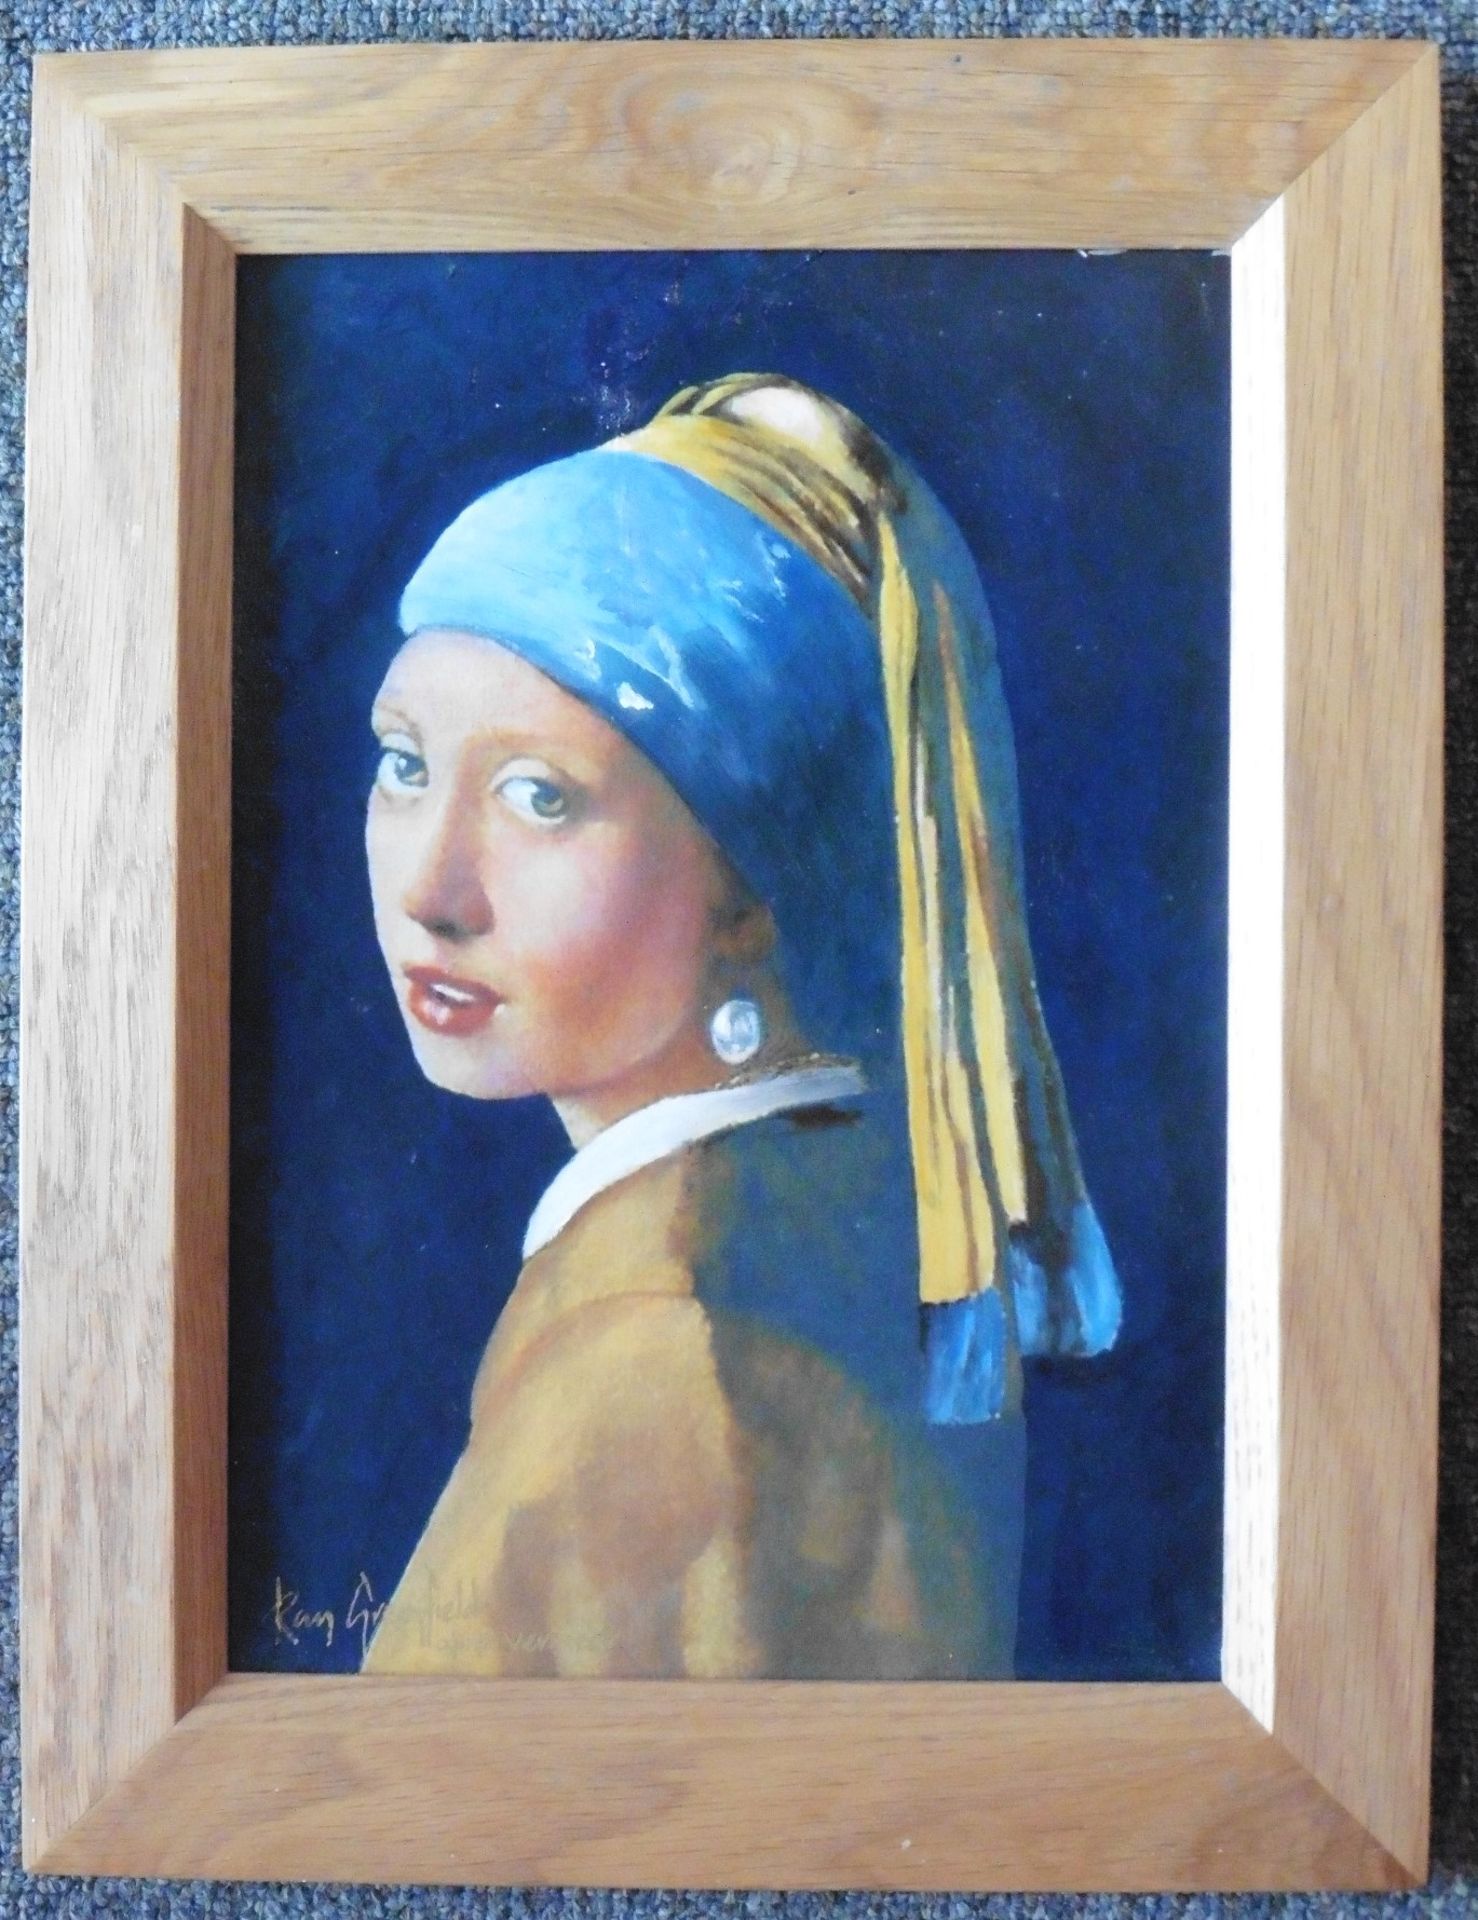 Ray Greenfield Oil painting “Girl with pearl earring” after Johannes Vermeer - Image 5 of 5